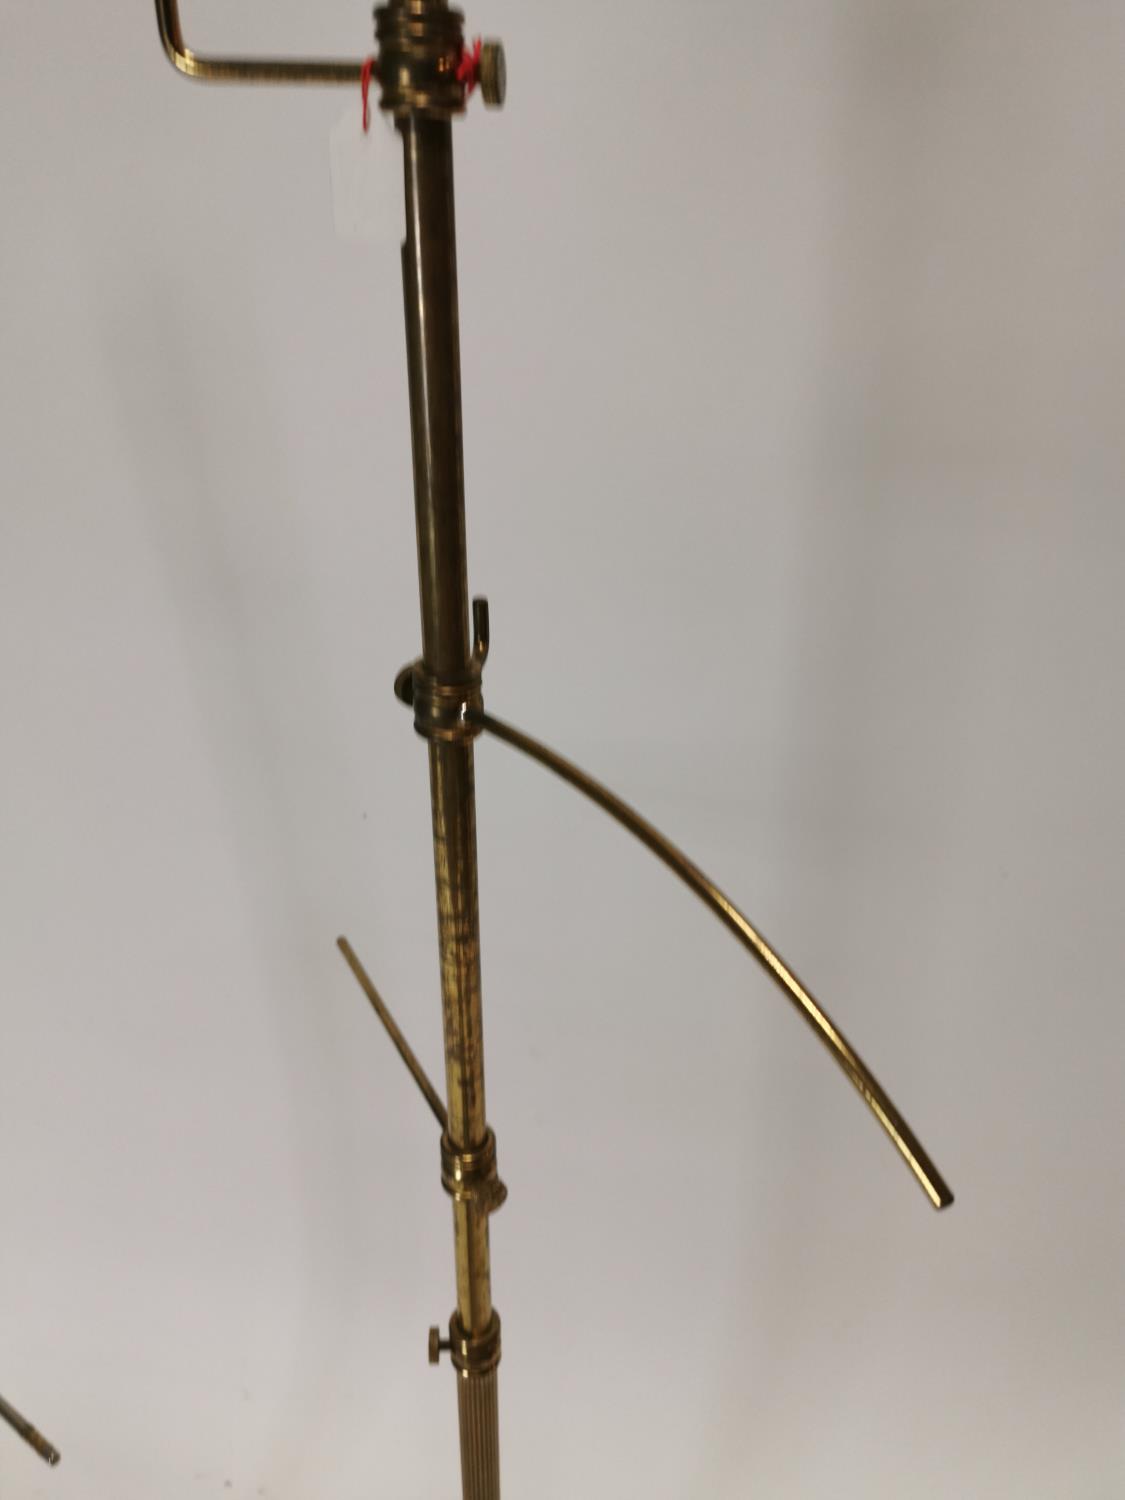 Two early 20th C. brass haberdashery shop hat stands {132 cm H and 104 cm H}. - Image 2 of 4